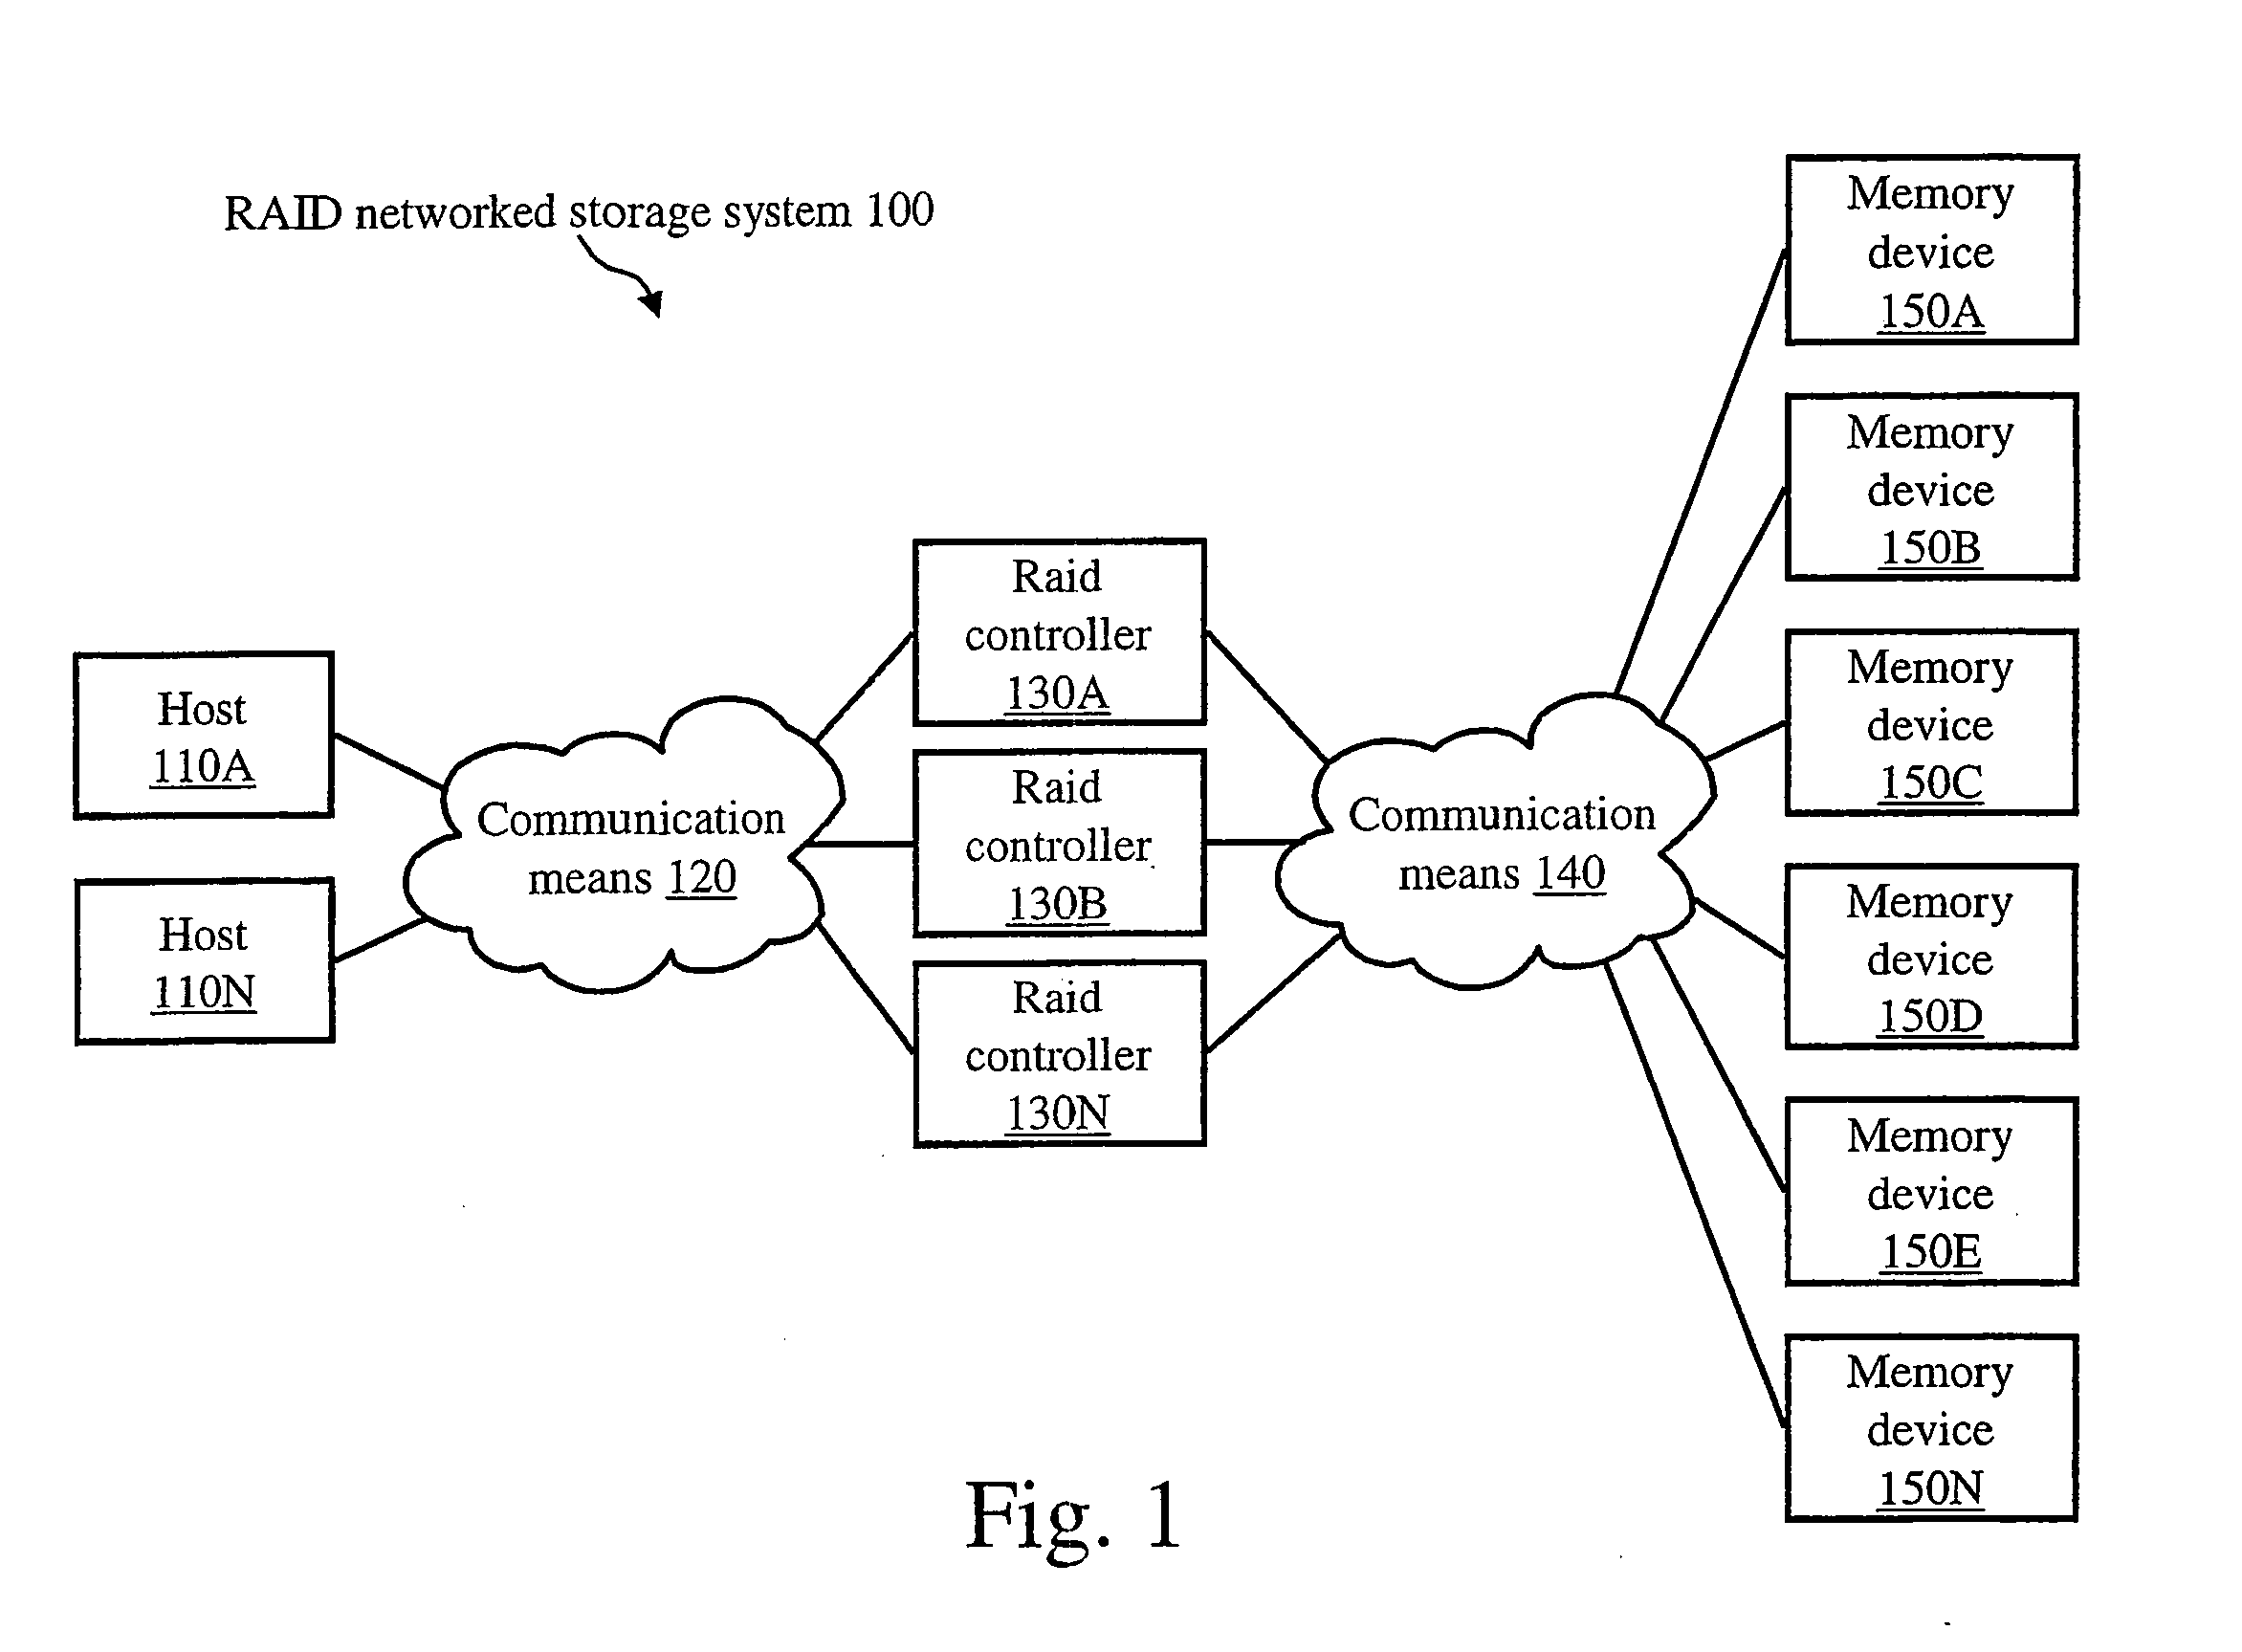 System and Method for Configuring Memory Devices for Use in a Network